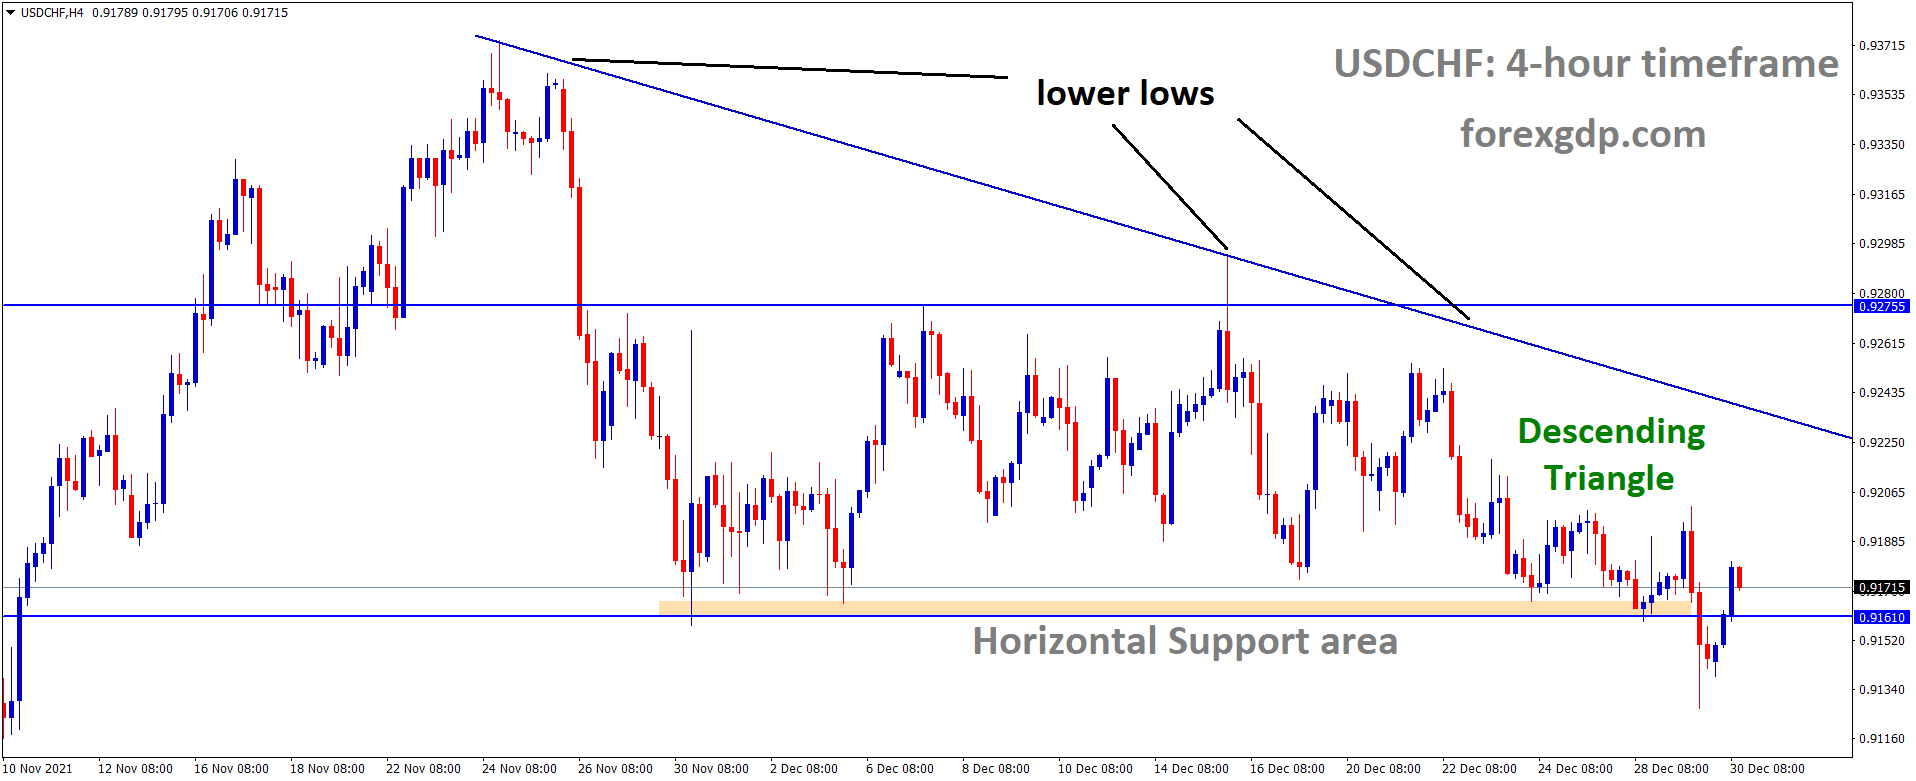 USDCHF is moving in the Descending triangle pattern and the market has rebounded from the Horizontal support area of the pattern.